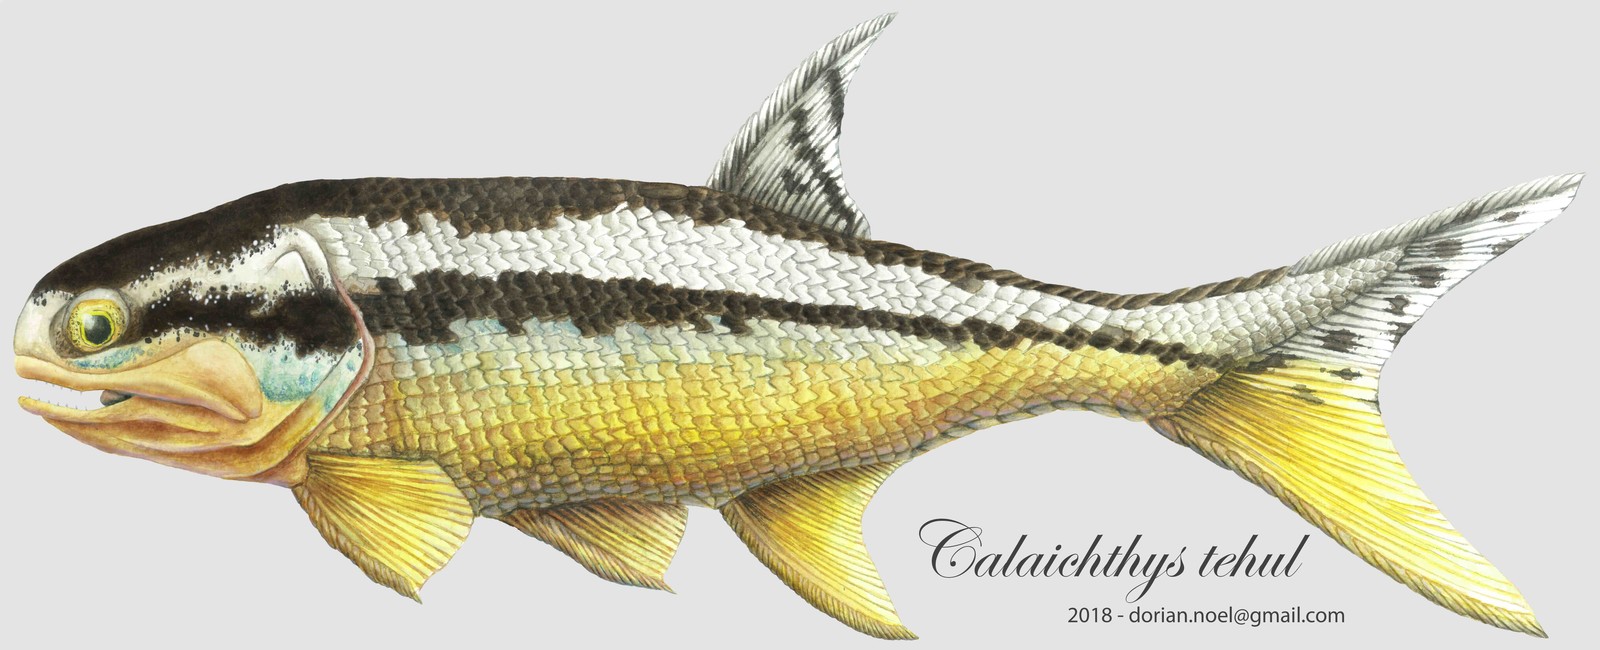 Reconstitution of a prehistoric fish - Calaichthys tehul